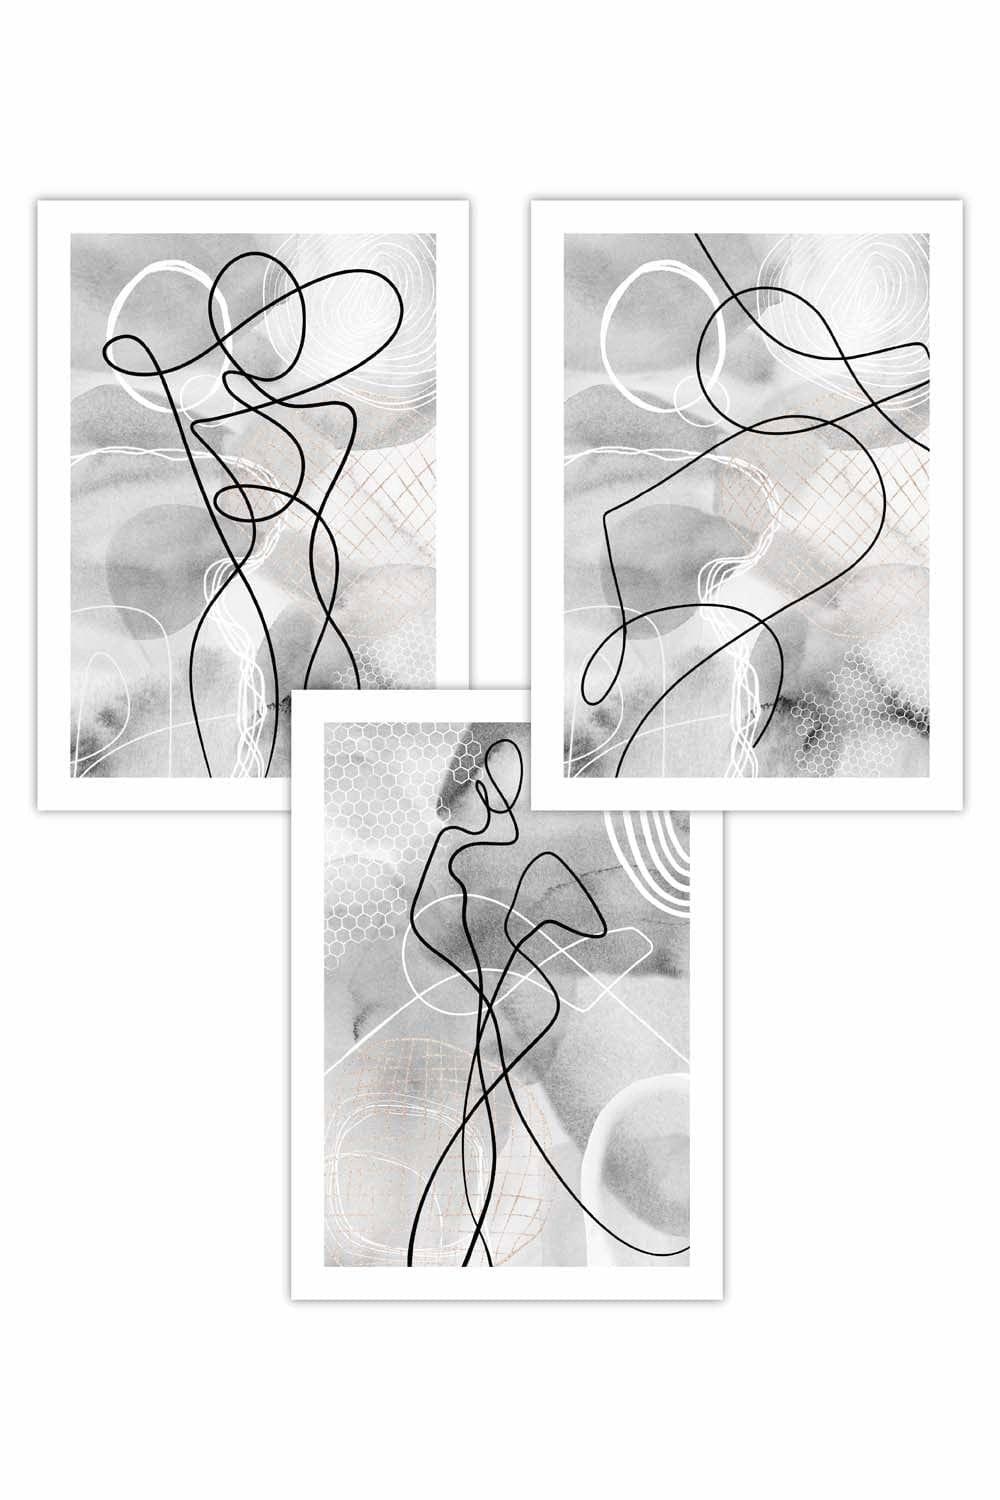 Set of 3 Abstract Fashion Line Art in Grey and White Art Posters